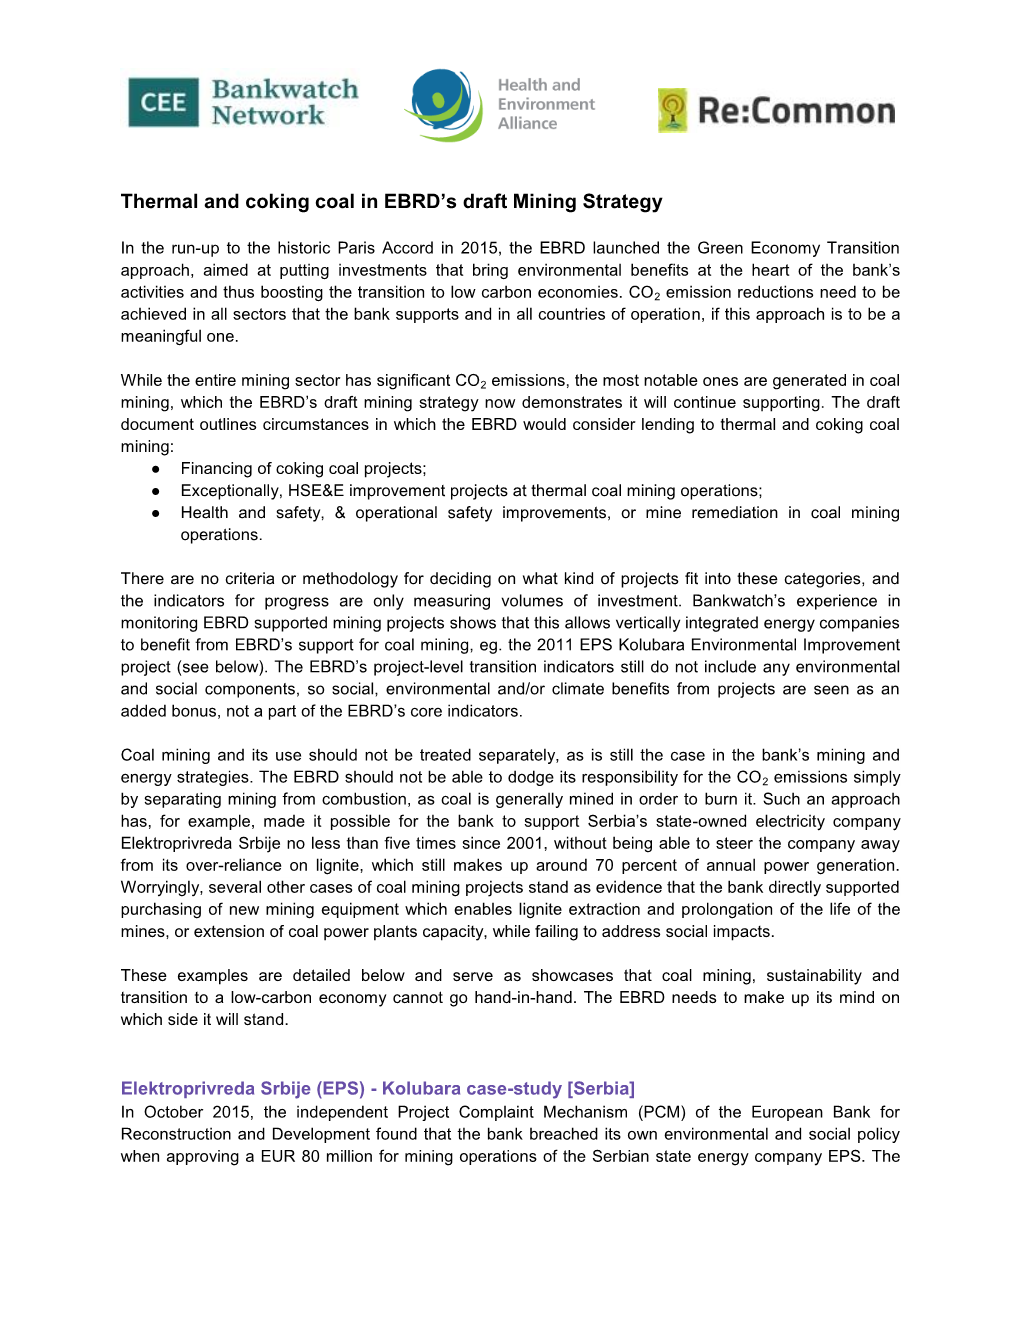 Thermal and Coking Coal in EBRD's Draft Mining Strategy